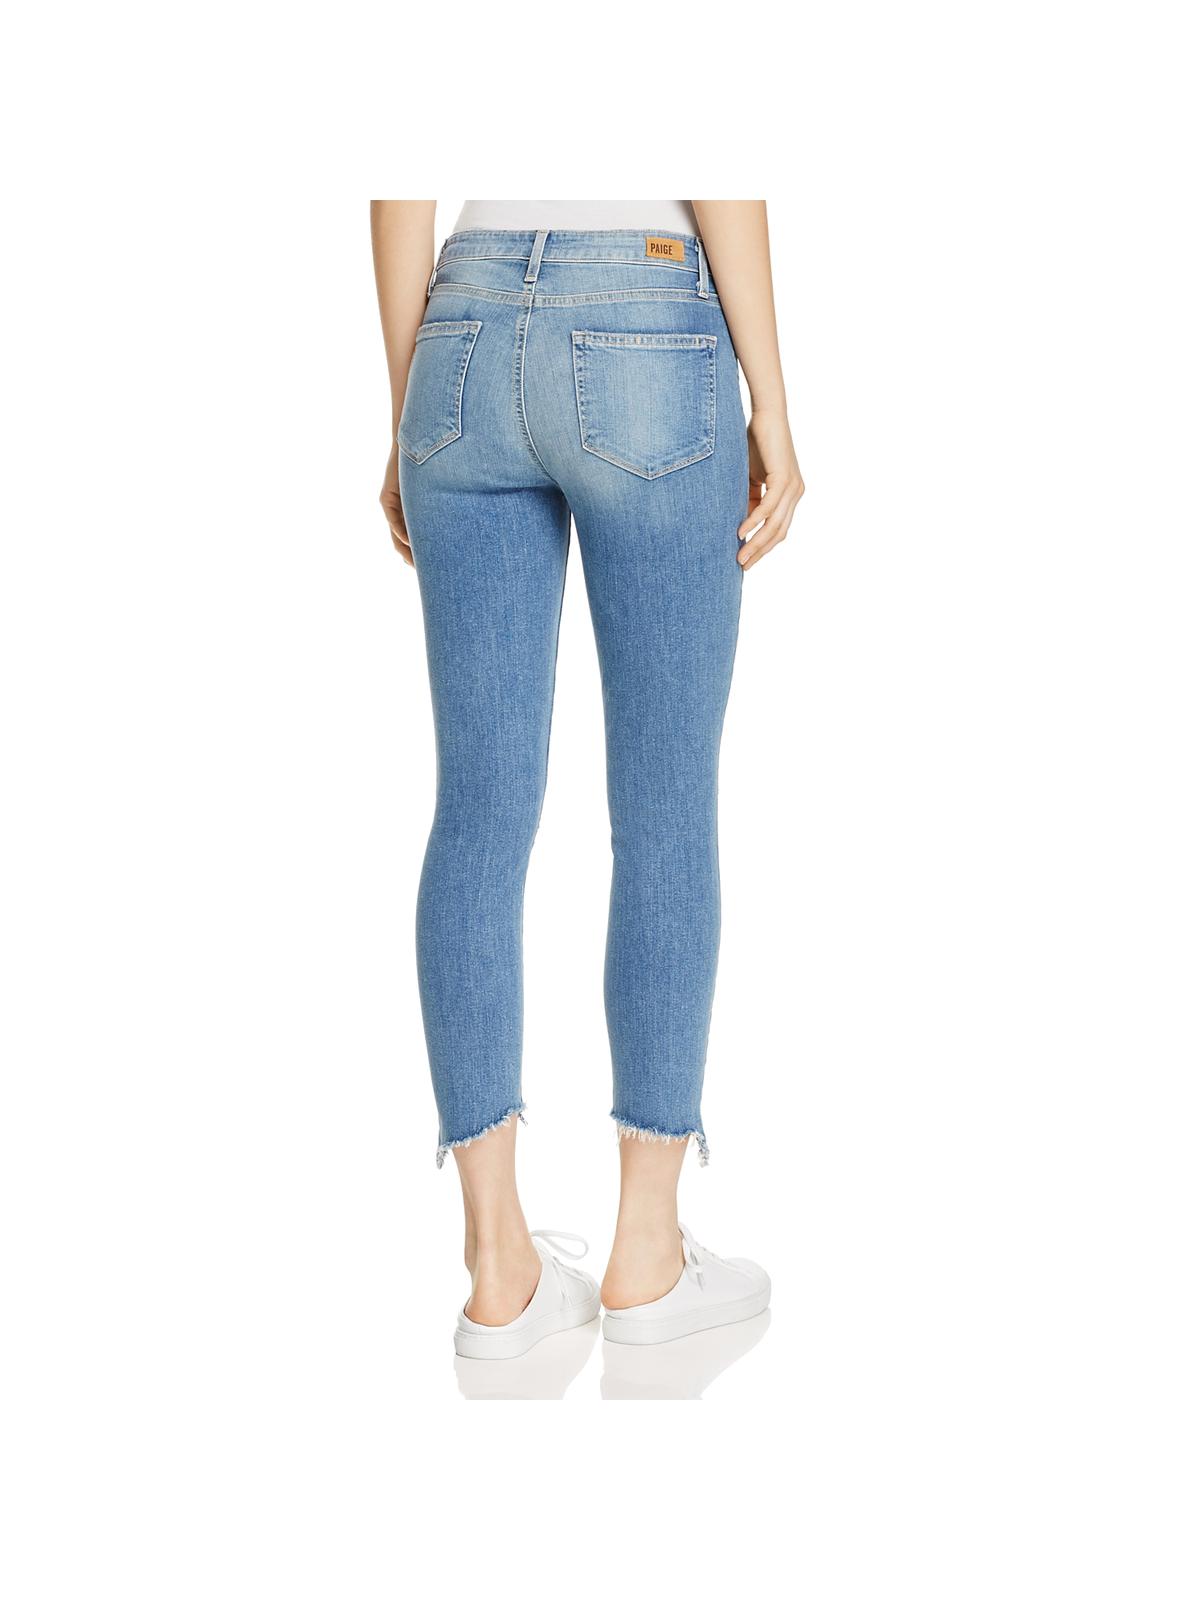 Paige Womens Hoxton Classic Rise Denim Cropped Jeans - image 2 of 2